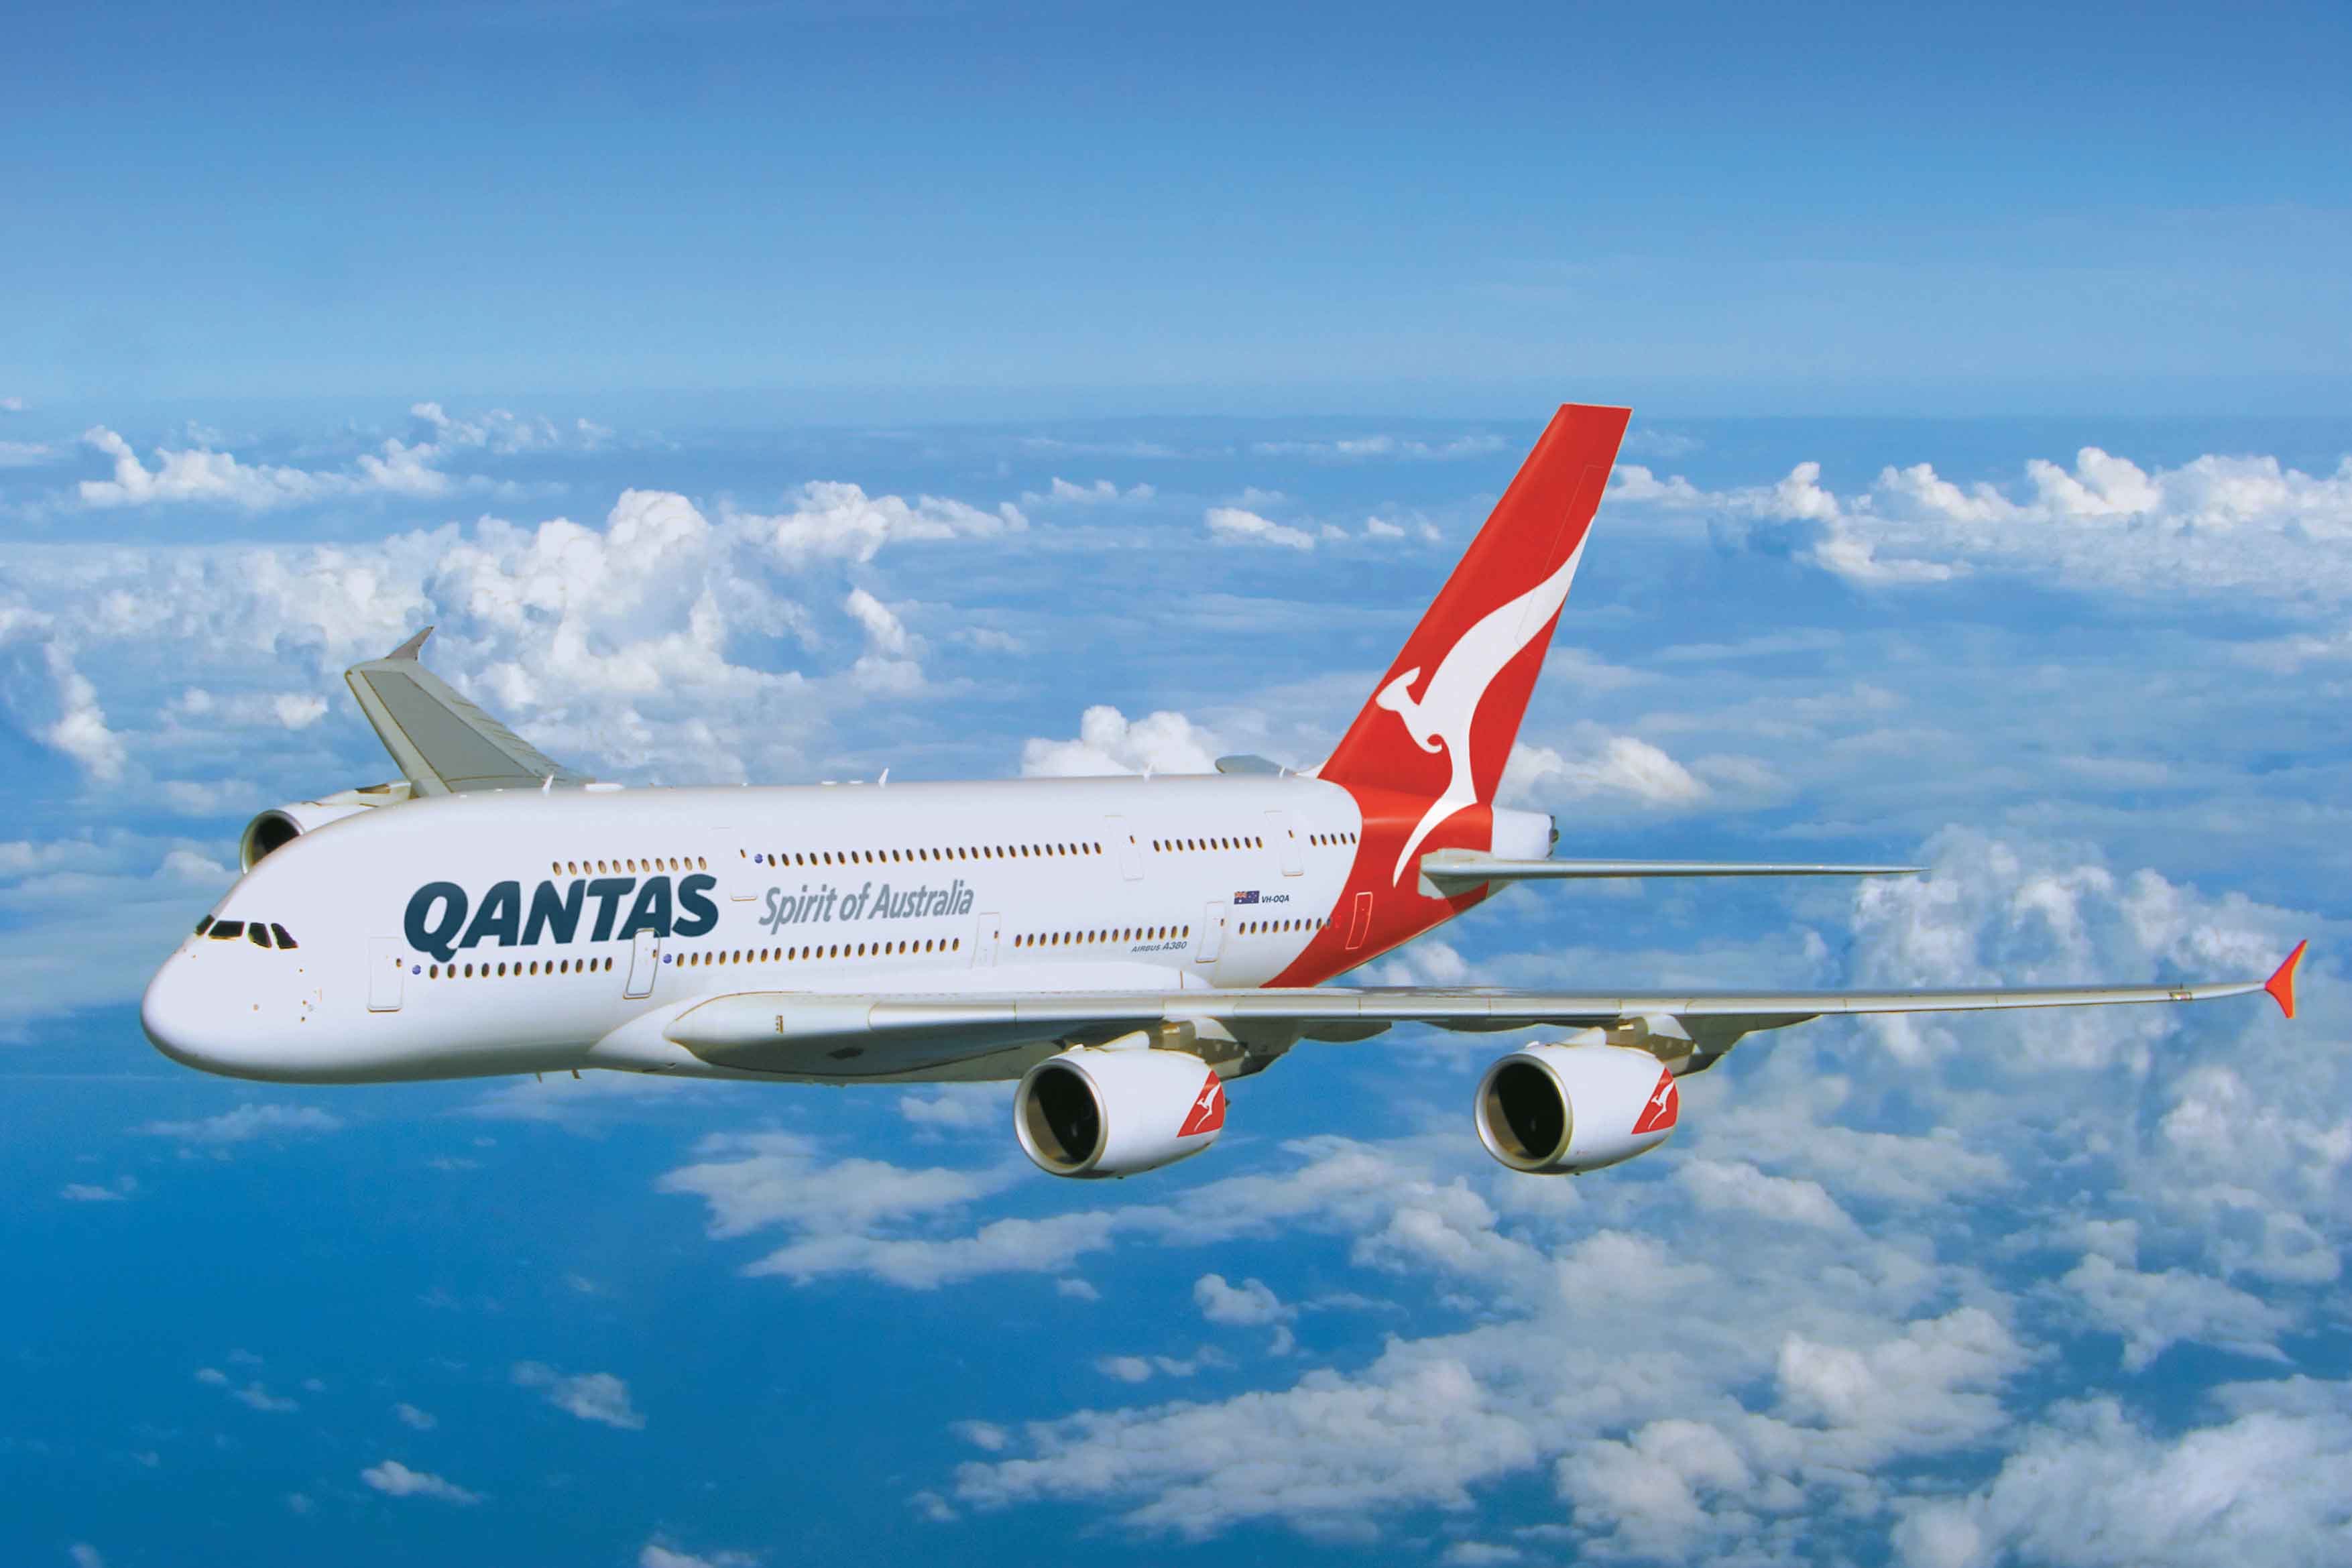 file:///C:/Documents%20and%20Settings/ALEX%20NAUGHTON.OWNER-2TYZC0SV7/My%20Documents/My%20Pictures/A380%20QANTAS%20in%20flight.jpg